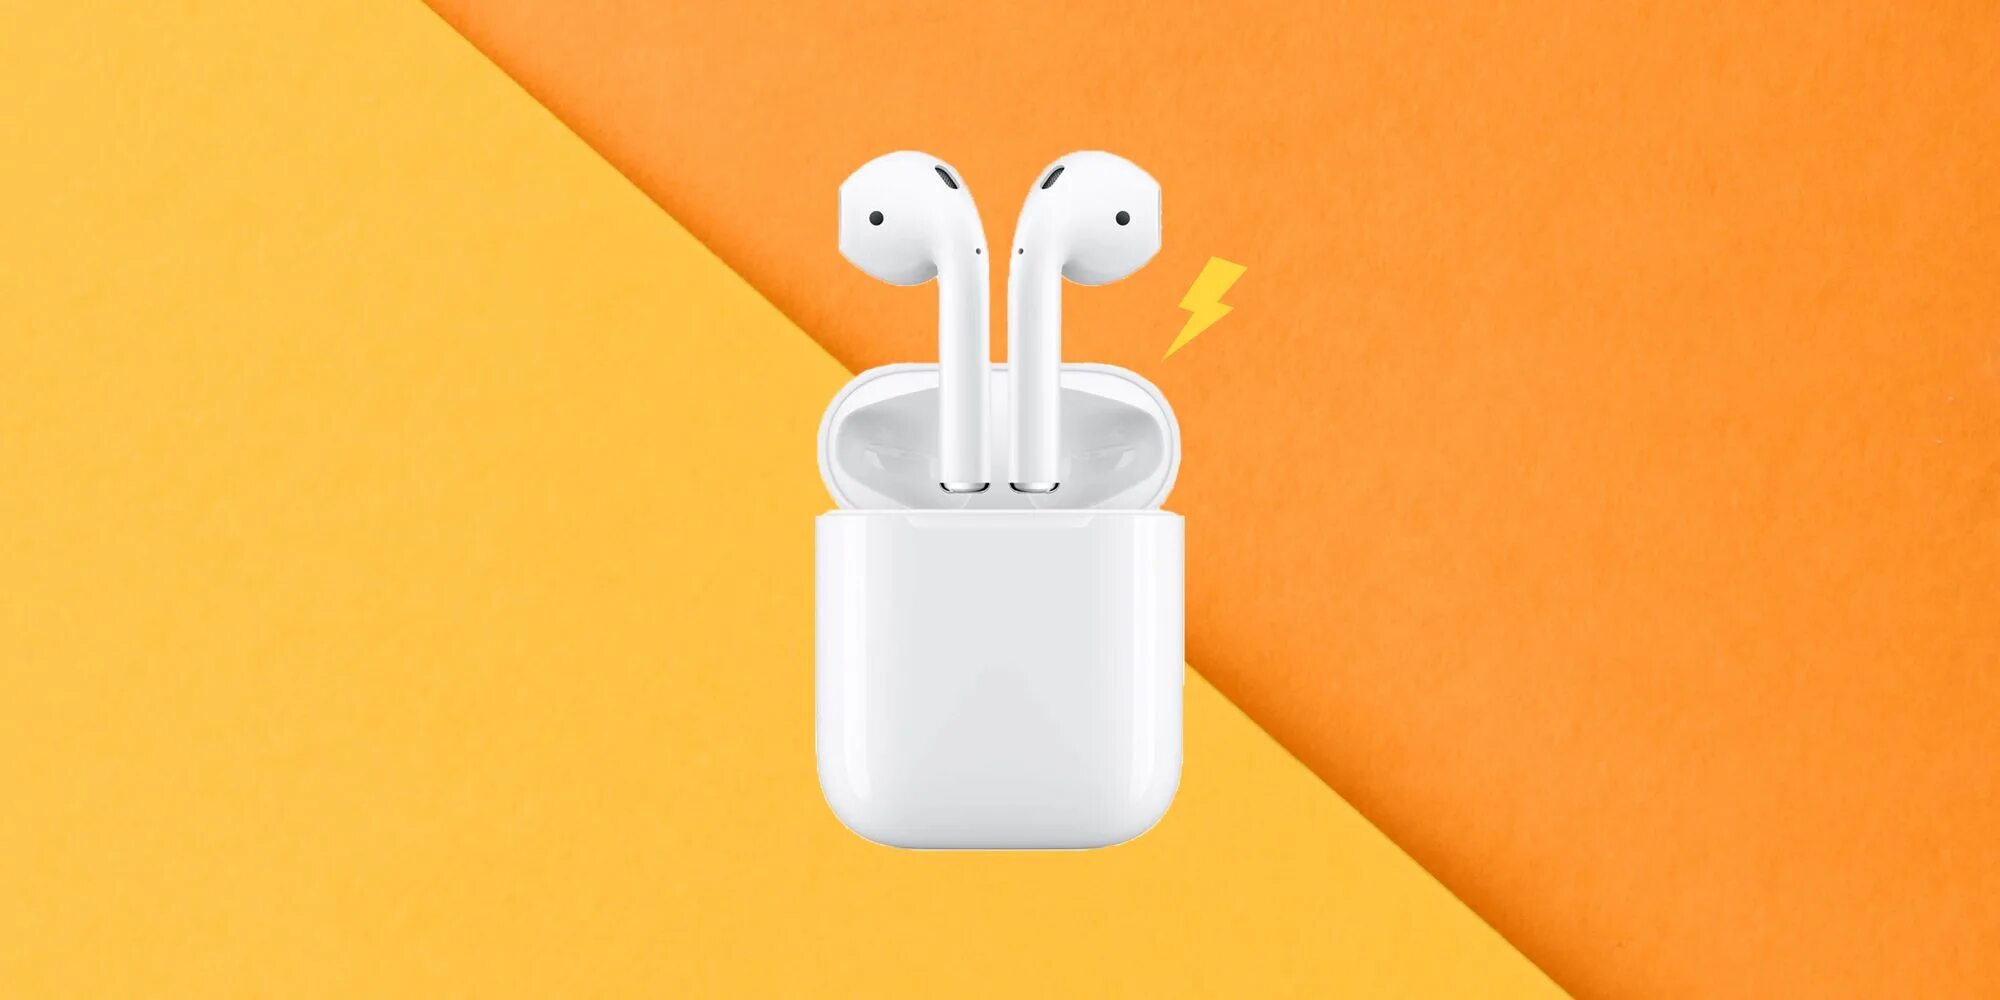 Airpods green. Air pods 2. Наушники AIRPODS 3. AIRPODS 2.2 Post. AIRPODS 3 на белом фоне.